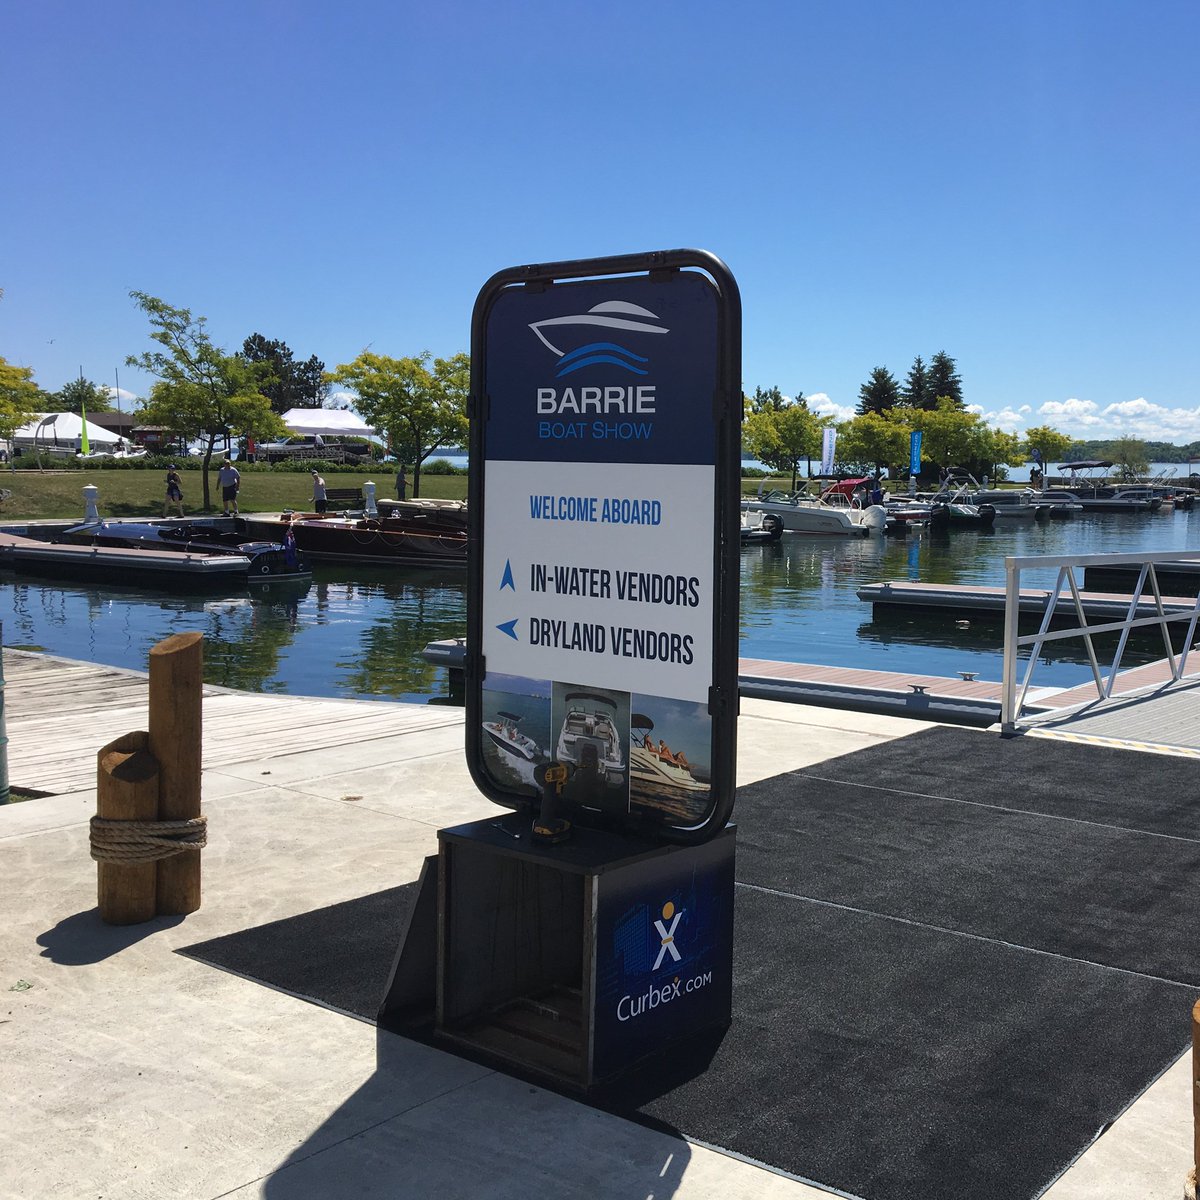 Welcome aboard to Day 3 of the Barrie Boat Show! Our vendors will be out till 5pm today! #VisitBarrieBoatShow #ViewFromTheWater #InWaterBoatShow #LakeSimcoeBoating #BarrieBoating #BarrieBoatShow